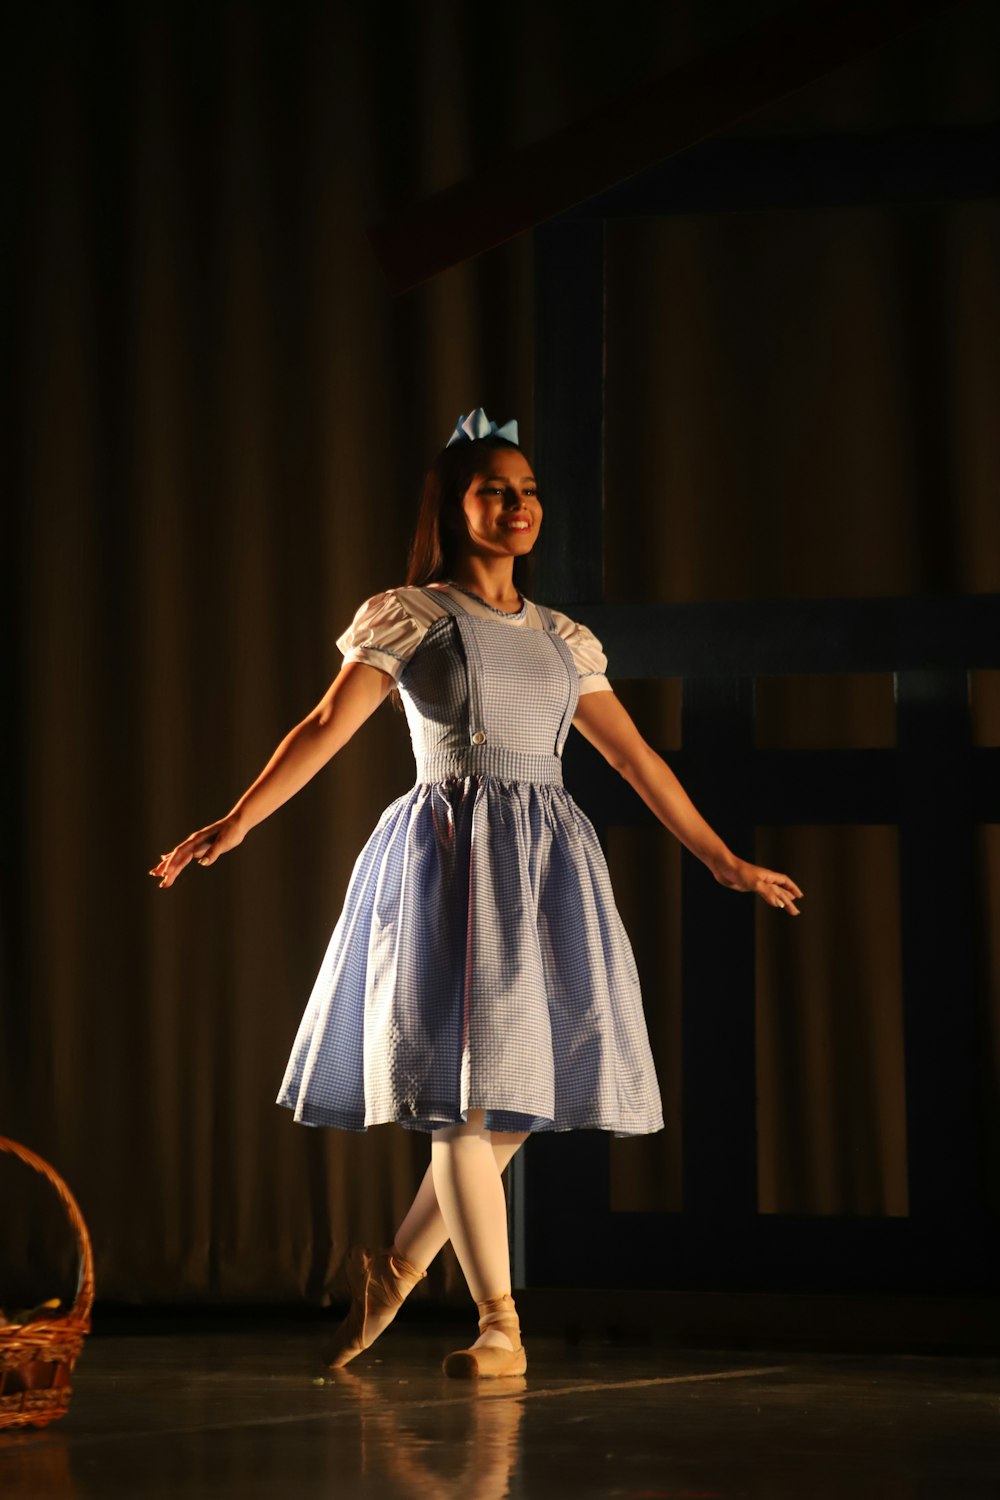 woman in white and blue dress standing on stage